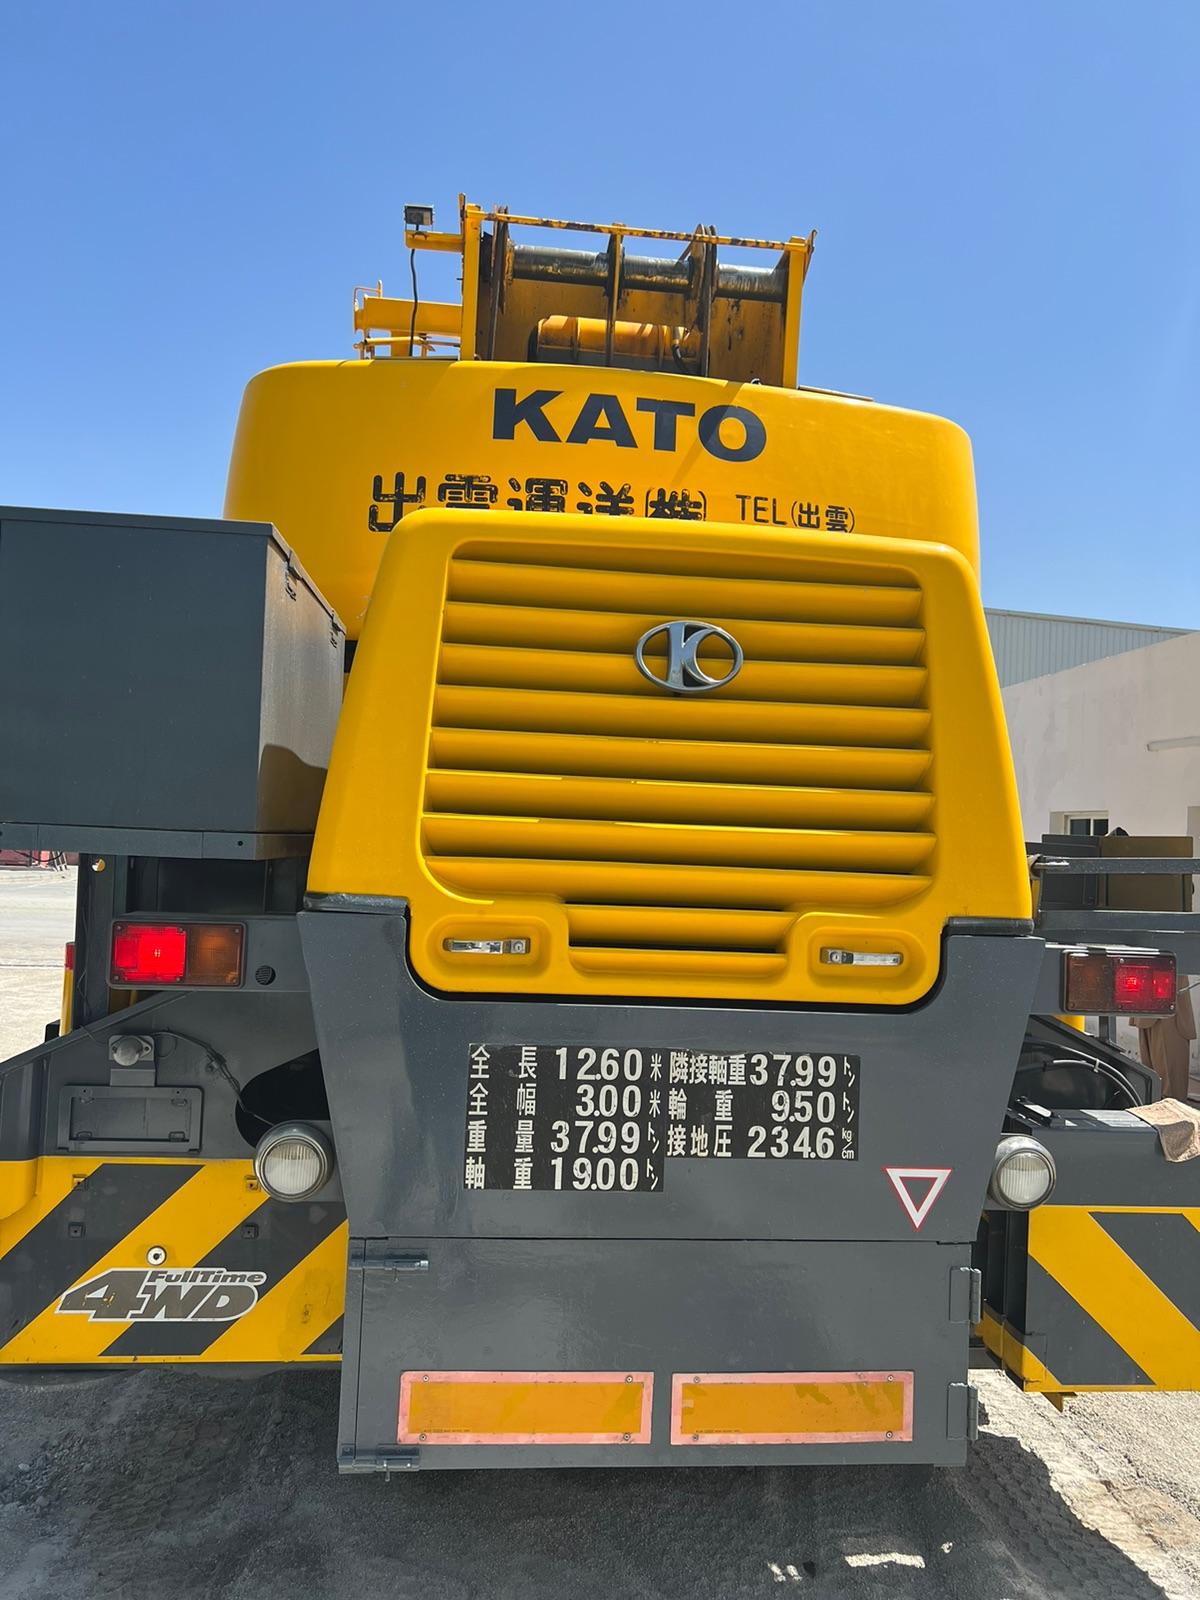 Ads Kato crane 50 tons 2002 Japanese Import for Sale